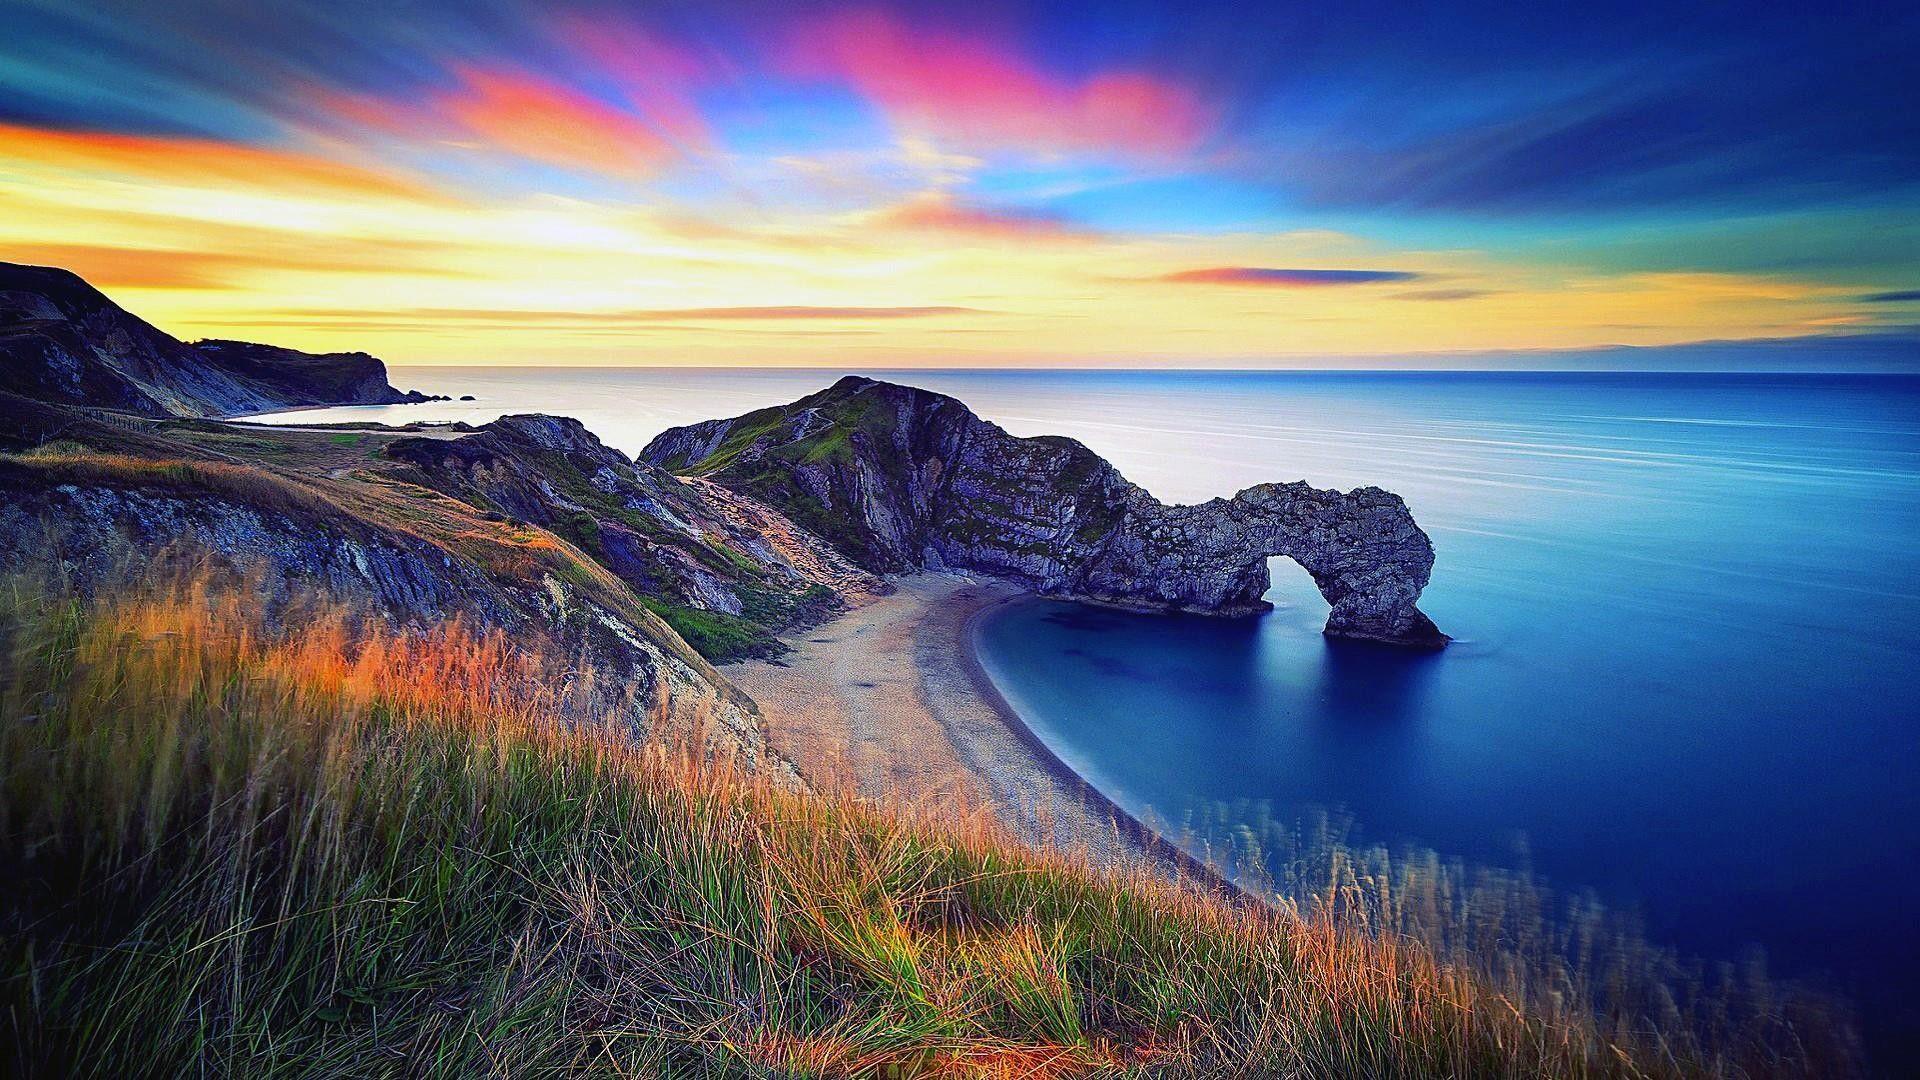 England Scenery Wallpapers - Top Free England Scenery Backgrounds